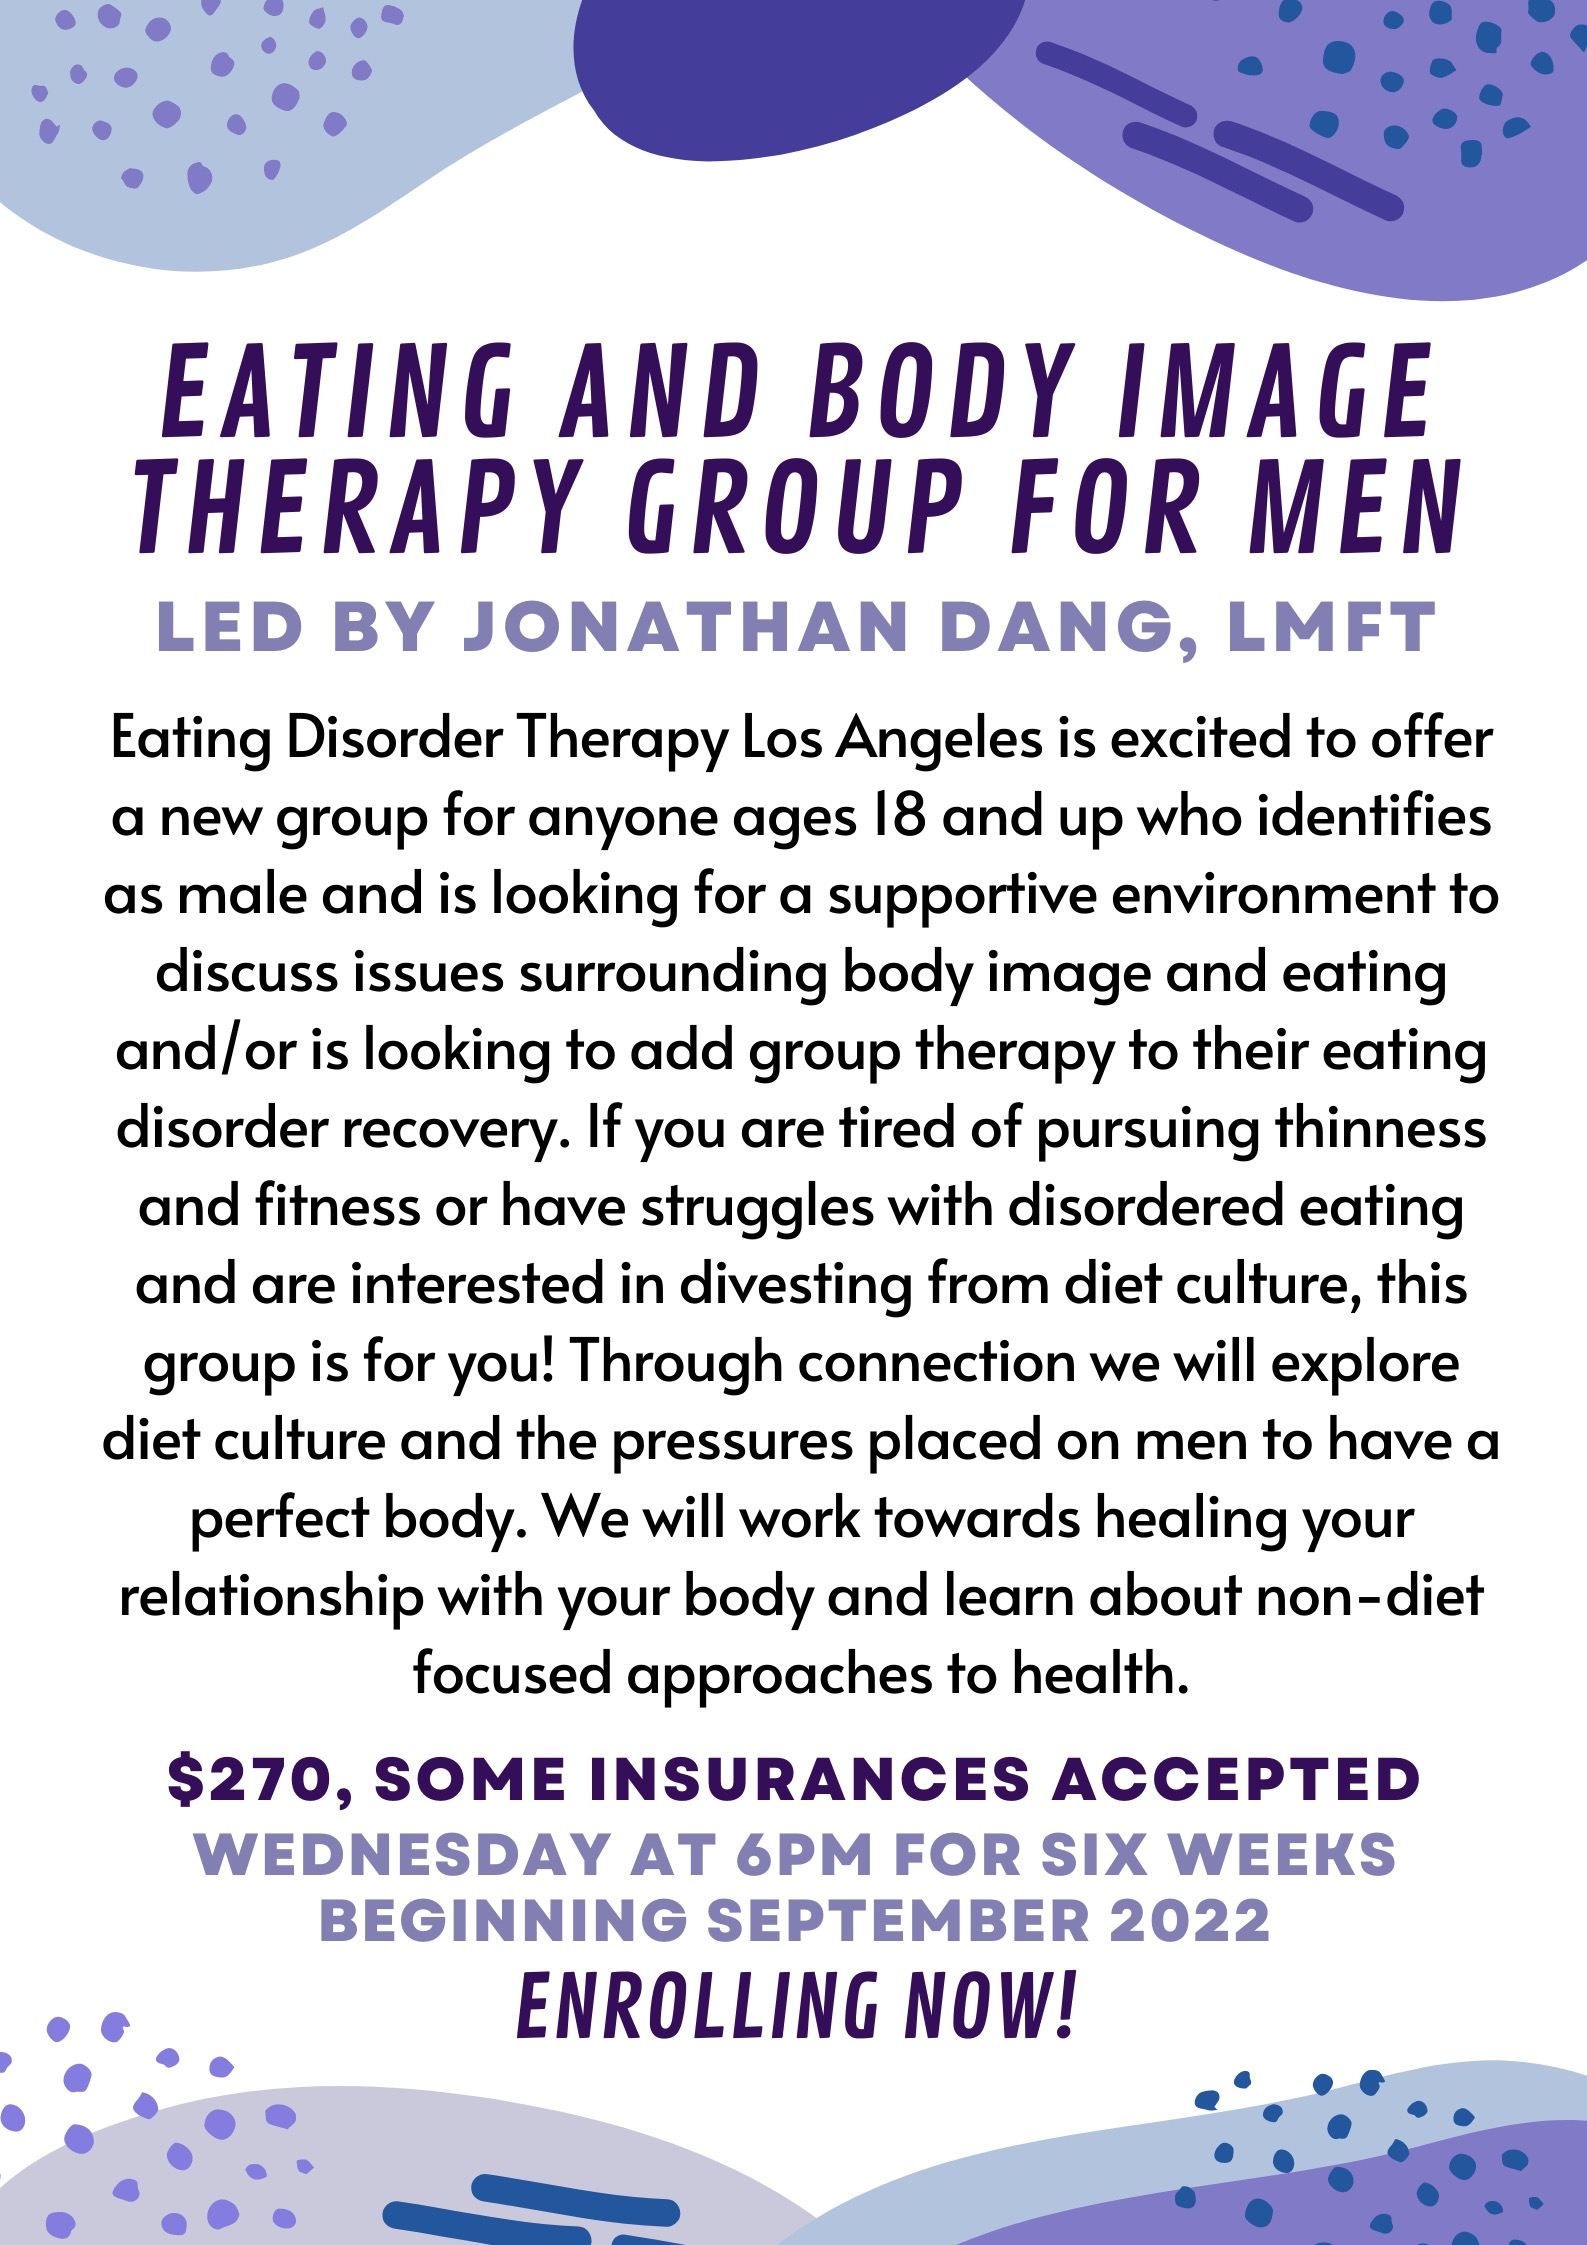 Eating and Body Image Therapy Group for Men